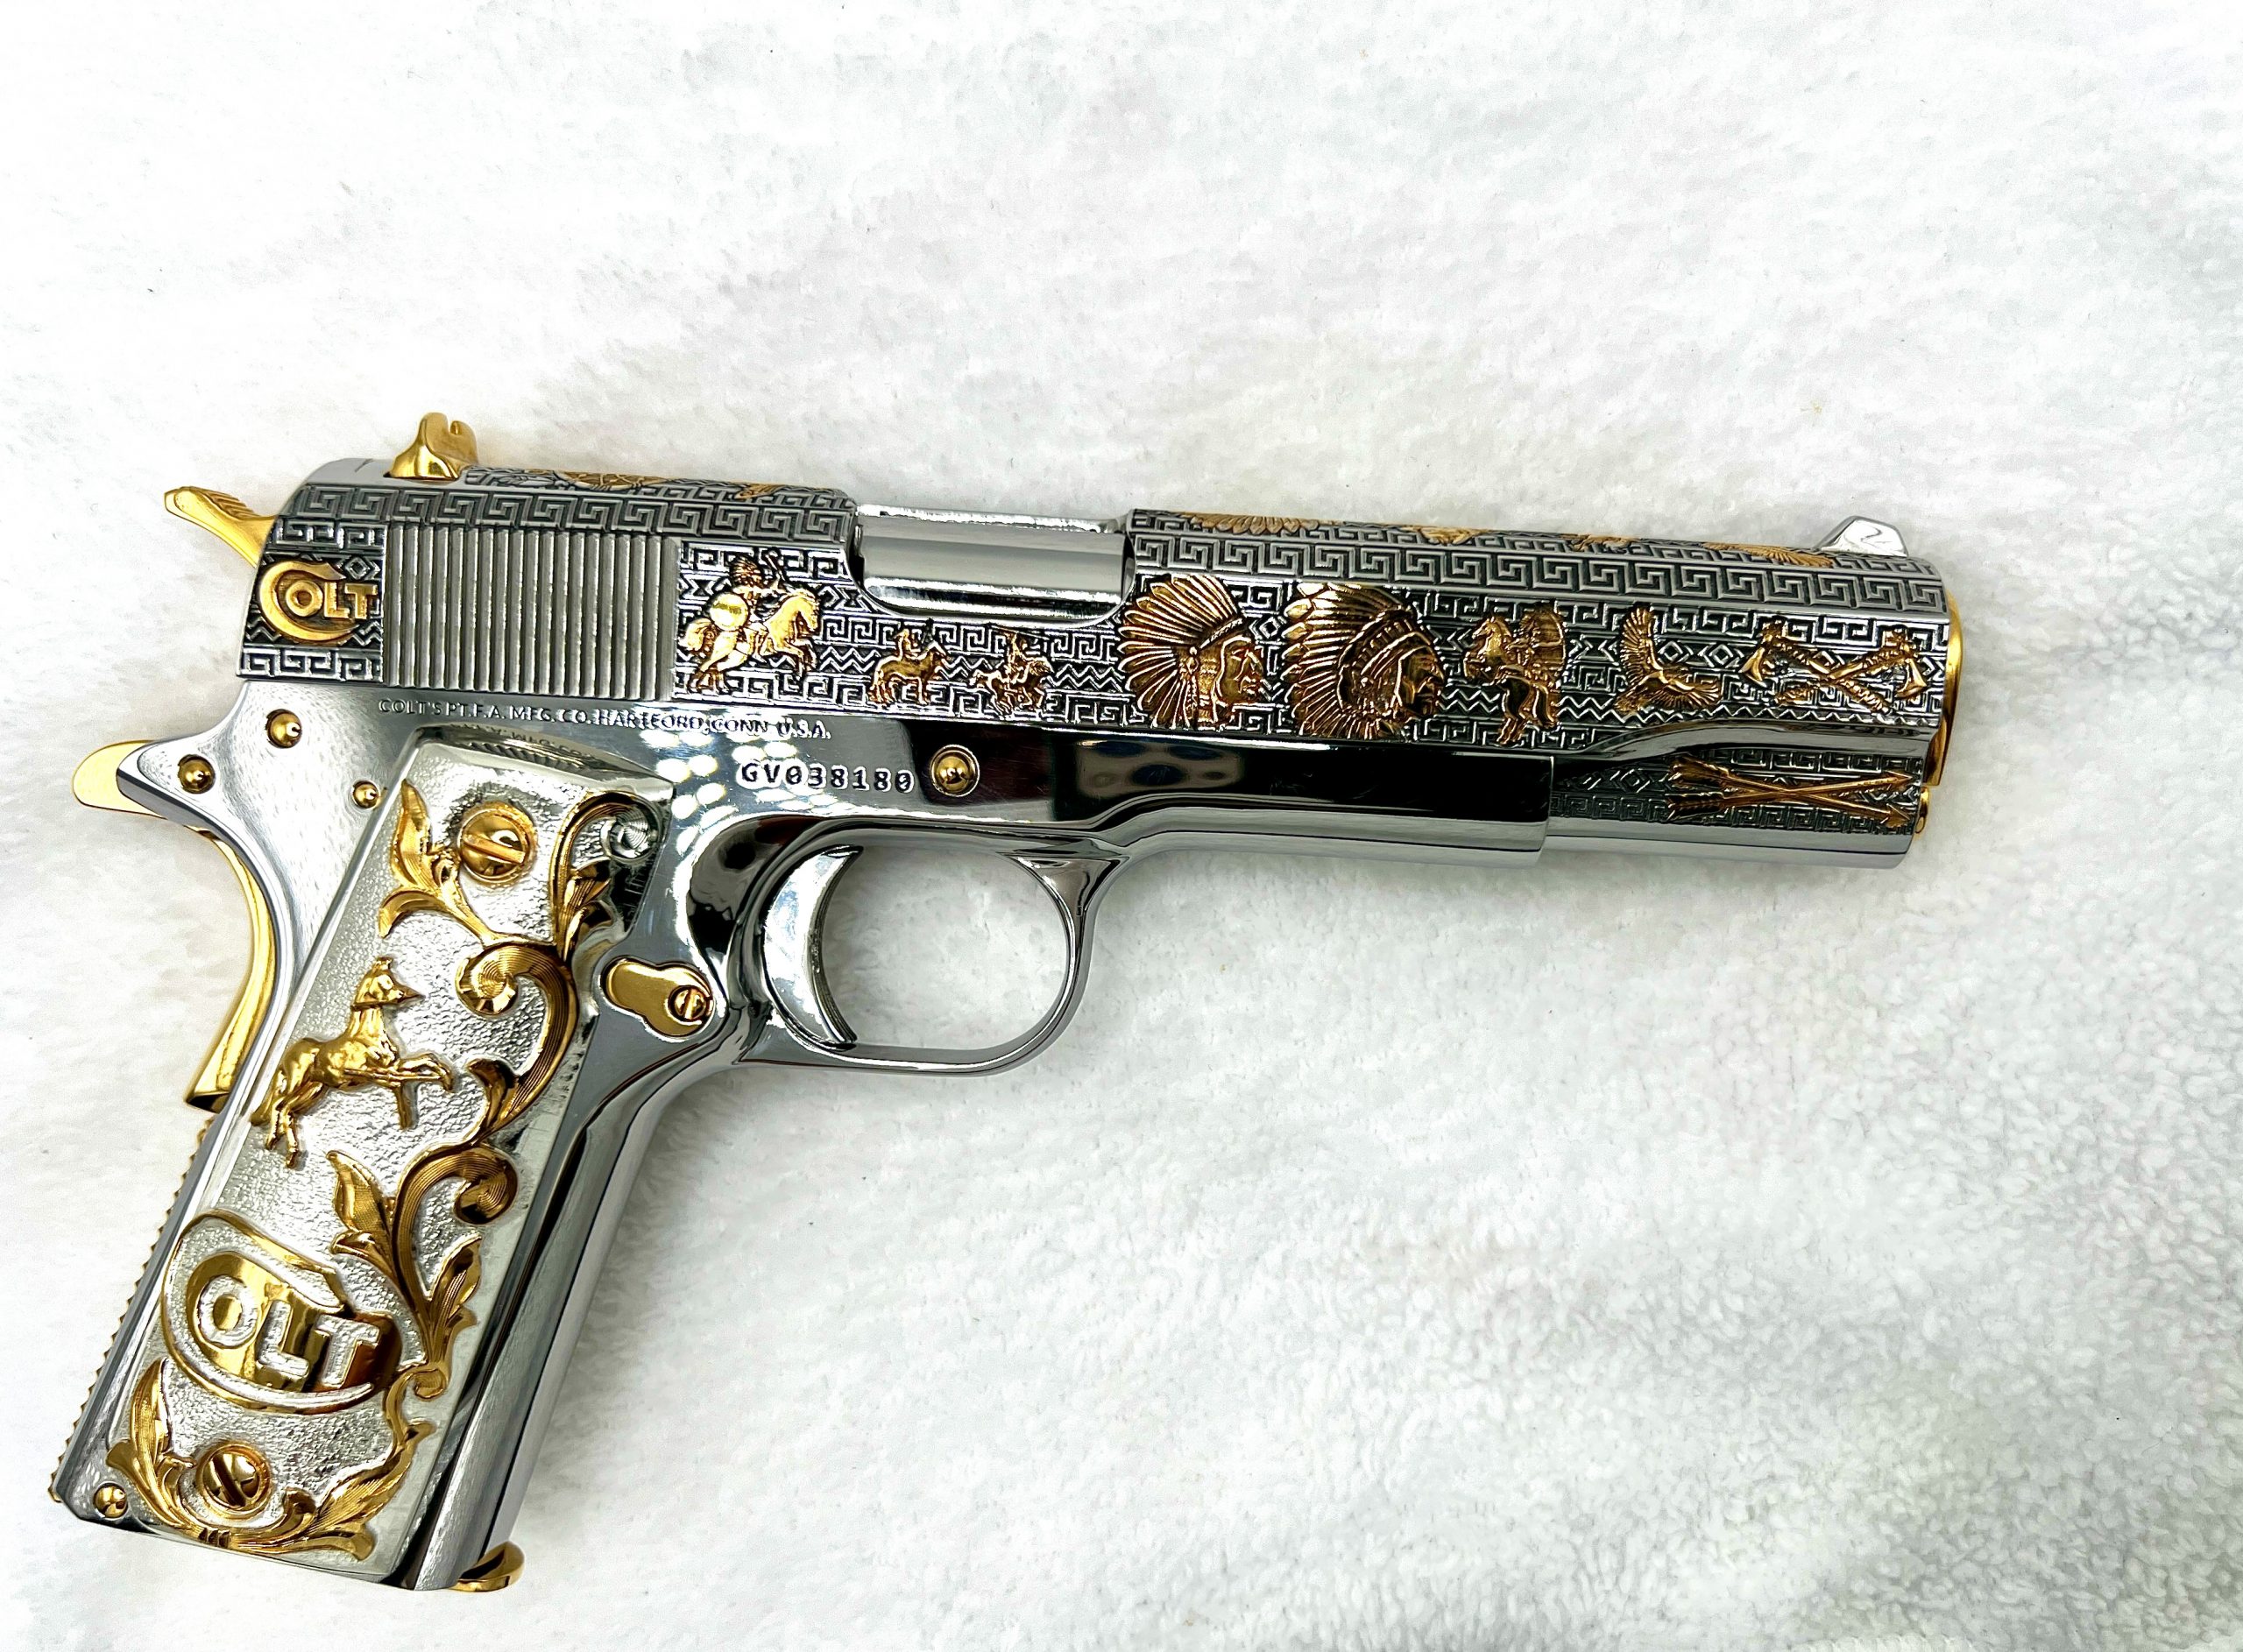 New Colt 1911 government 38 super Fully custom engraved. 24 carats gold plated parts.